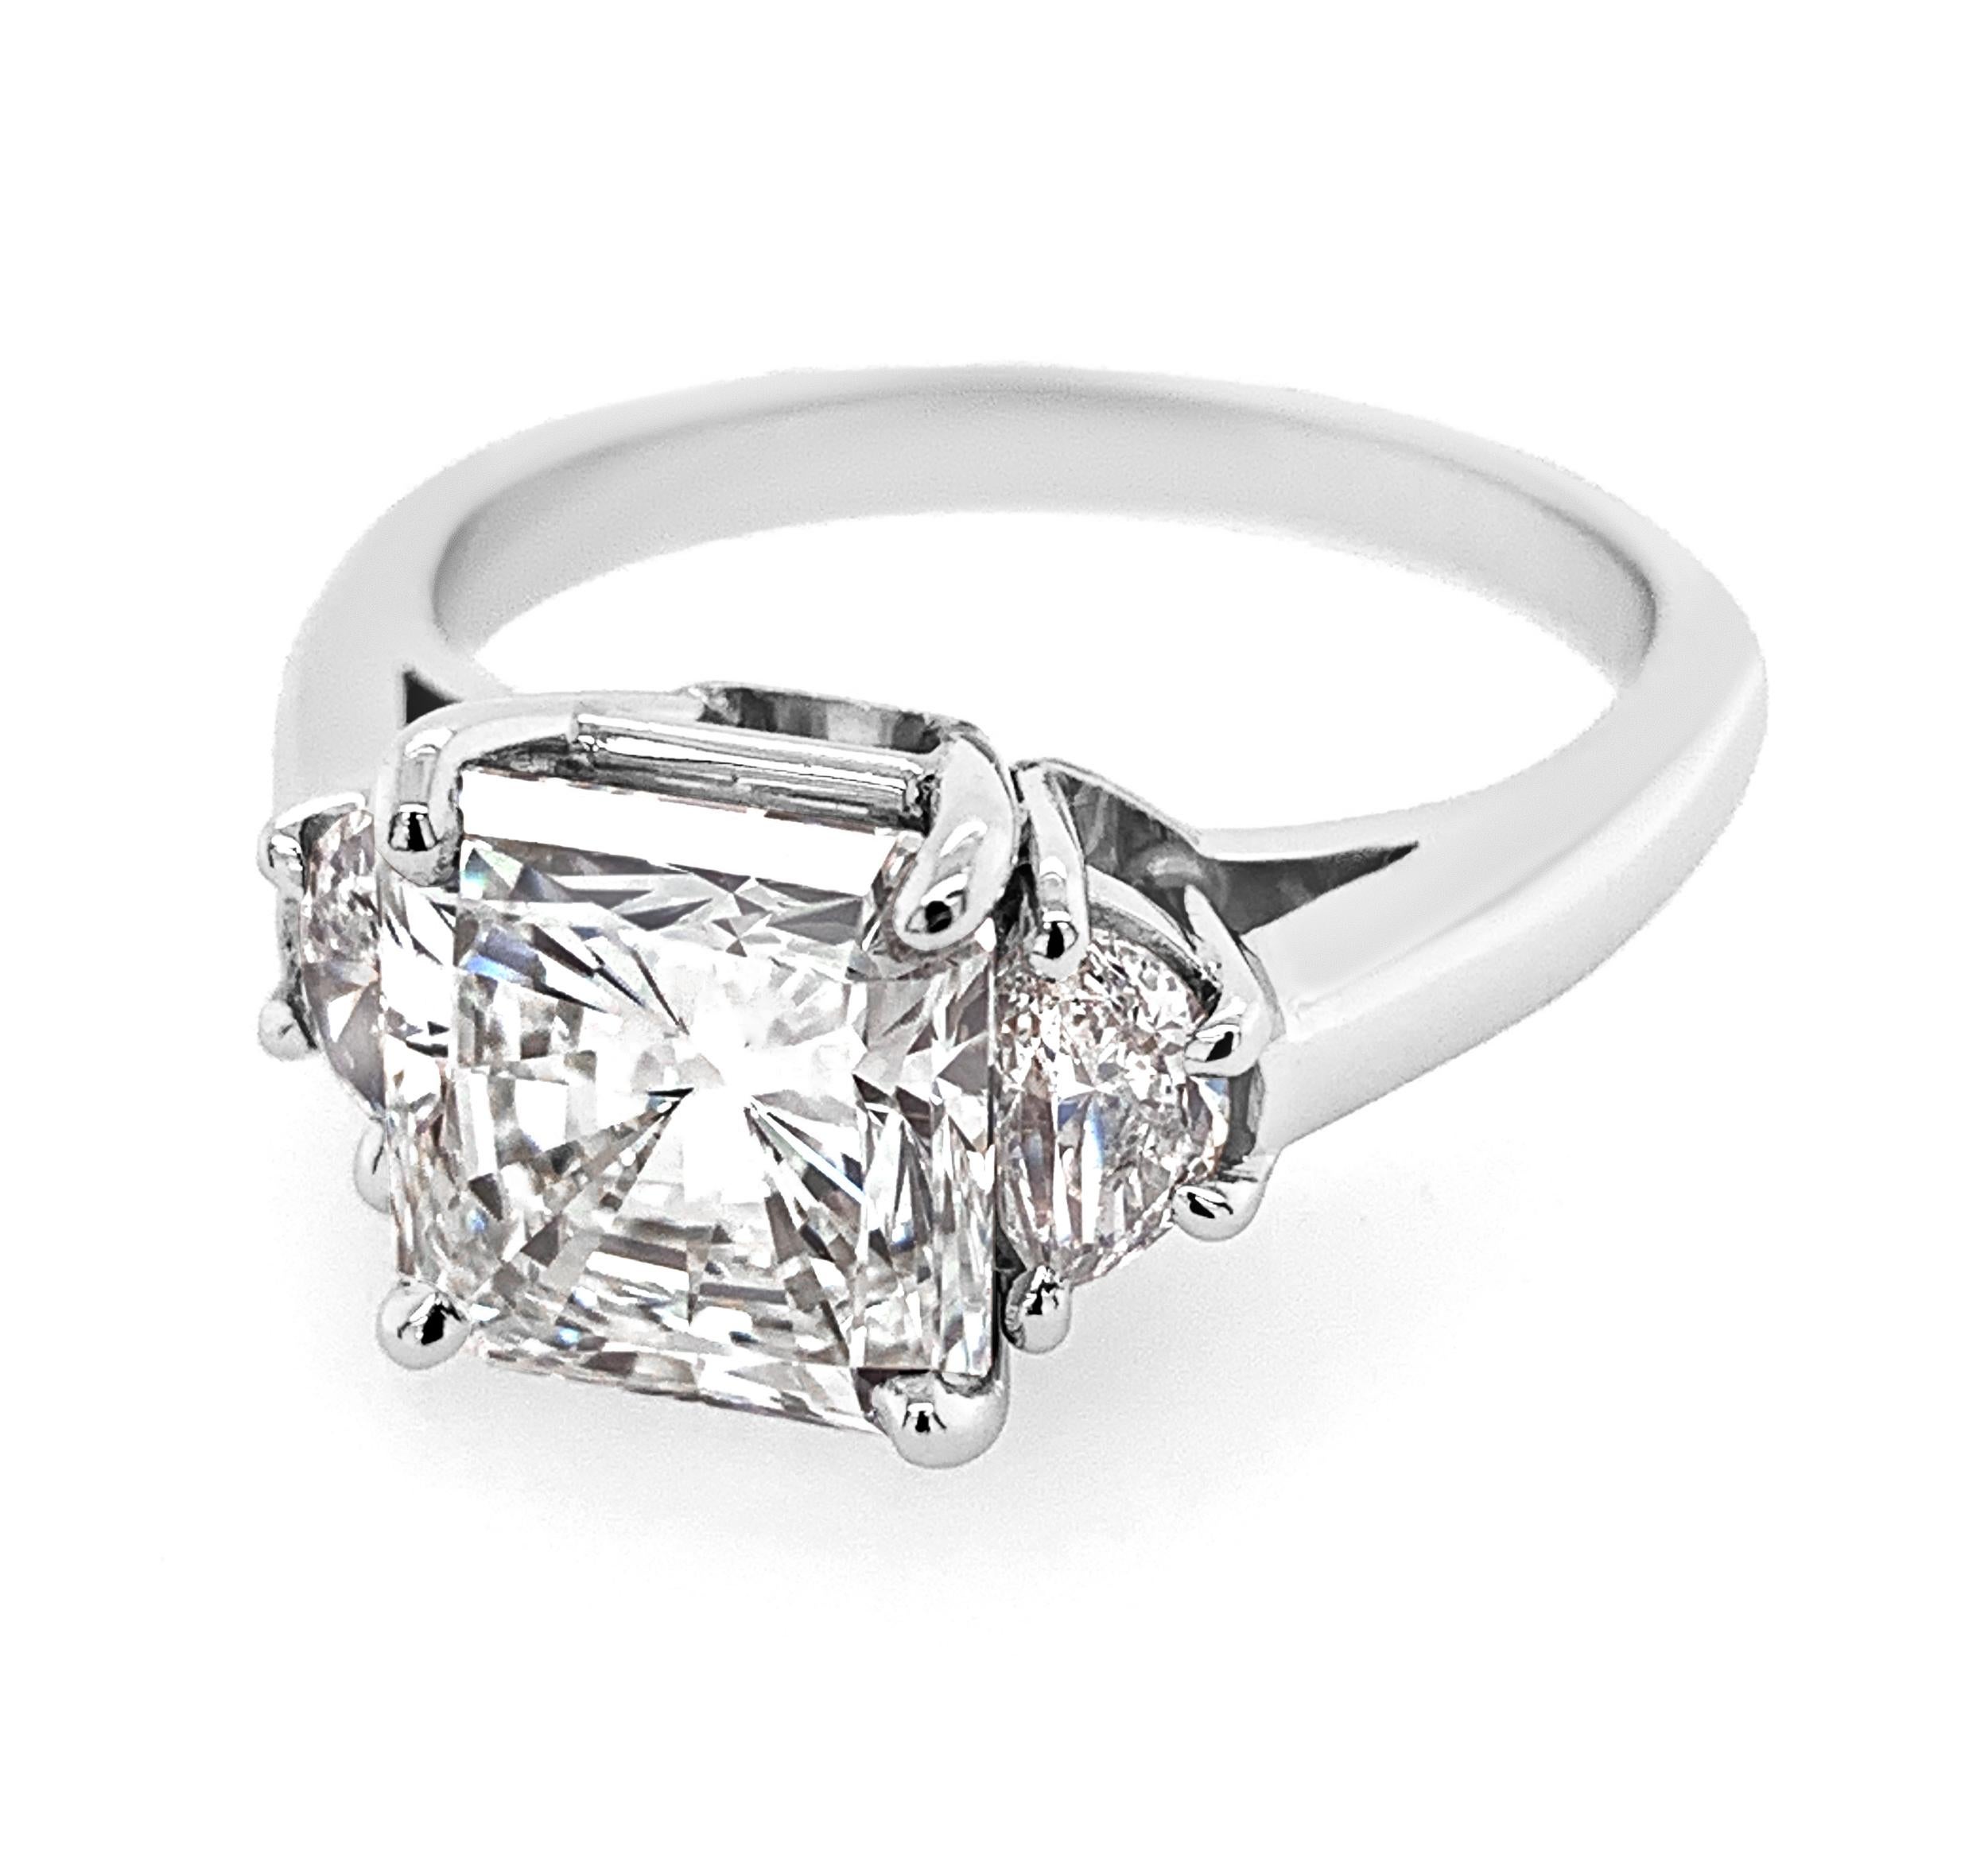 3.02 Carat Radiant Cut Diamond Platinum Ring with 0.46 Carat (total weight) Half-Moon side Diamonds.  Center stone is H color, VVS1 clarity.  Ring is Platinum.  Finger size is 6.75.

